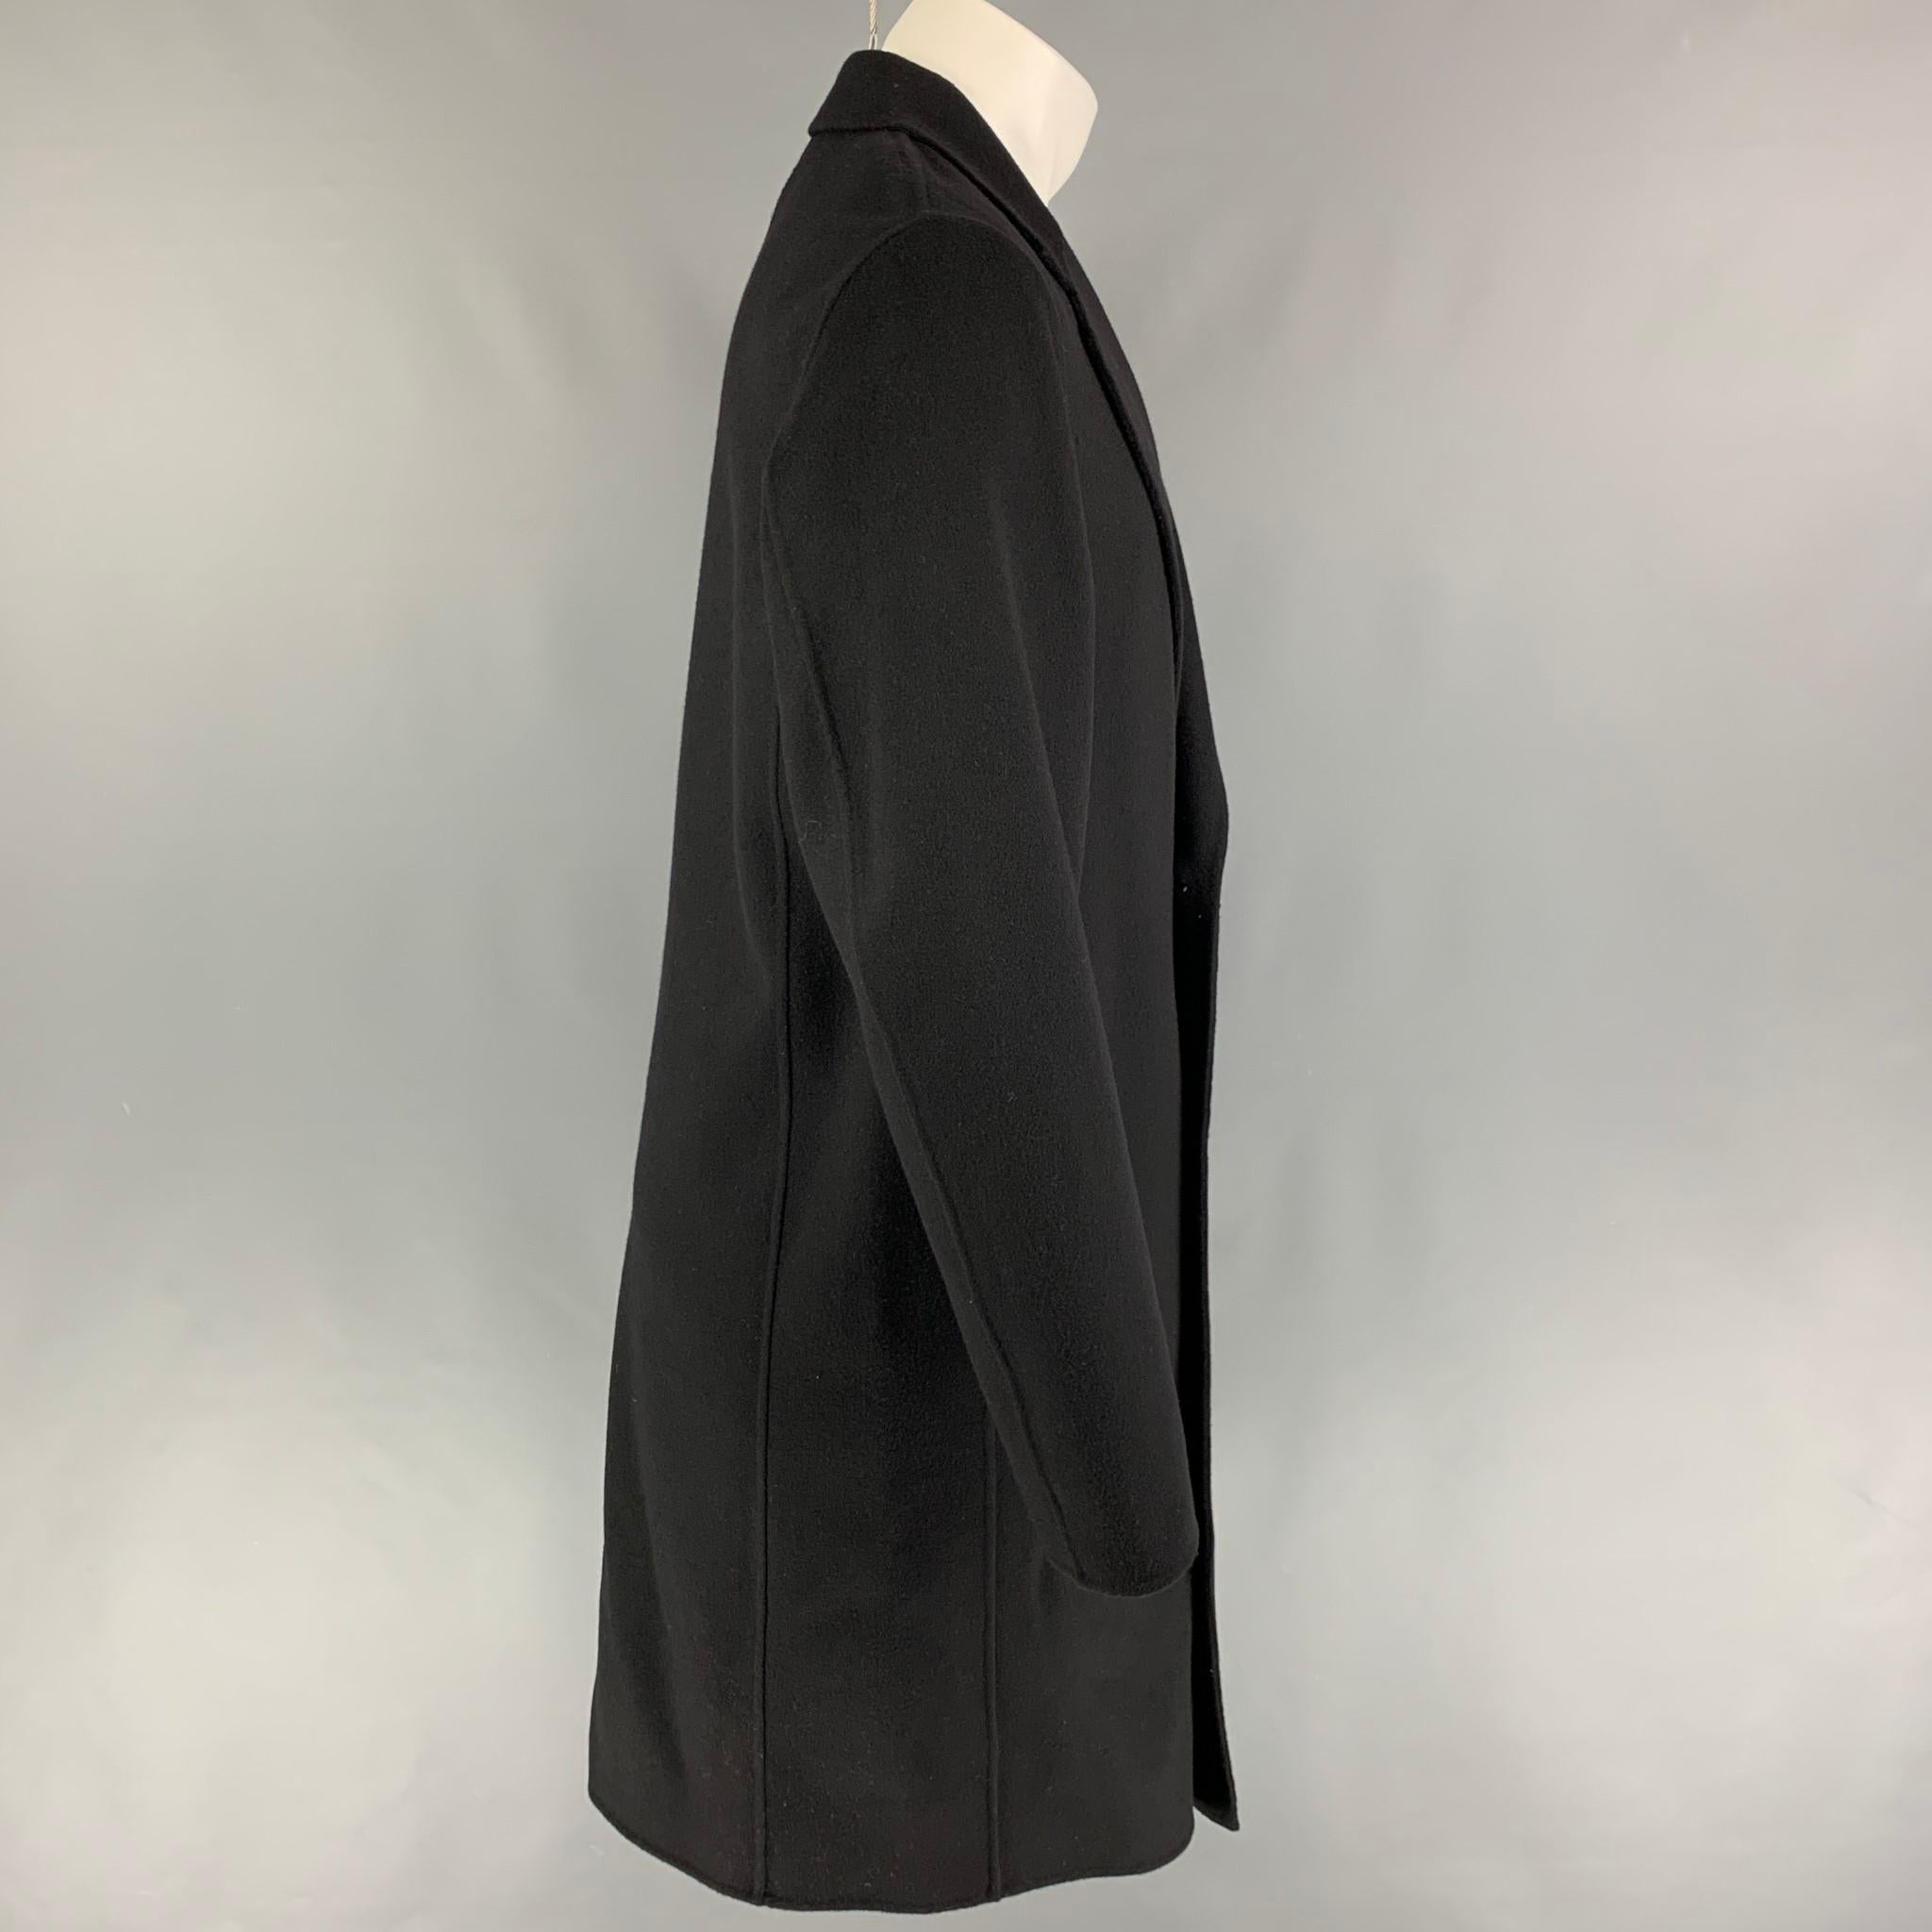 THEORY coat comes in a black cashmere featuring a notch lapel, slit pockets, single back vent, and a double breasted closure. 

New With Tags.
Marked: M
Original Retail Price: $795.00

Measurements:

Shoulder: 18 in.
Chest: 40 in.
Sleeve: 26.5